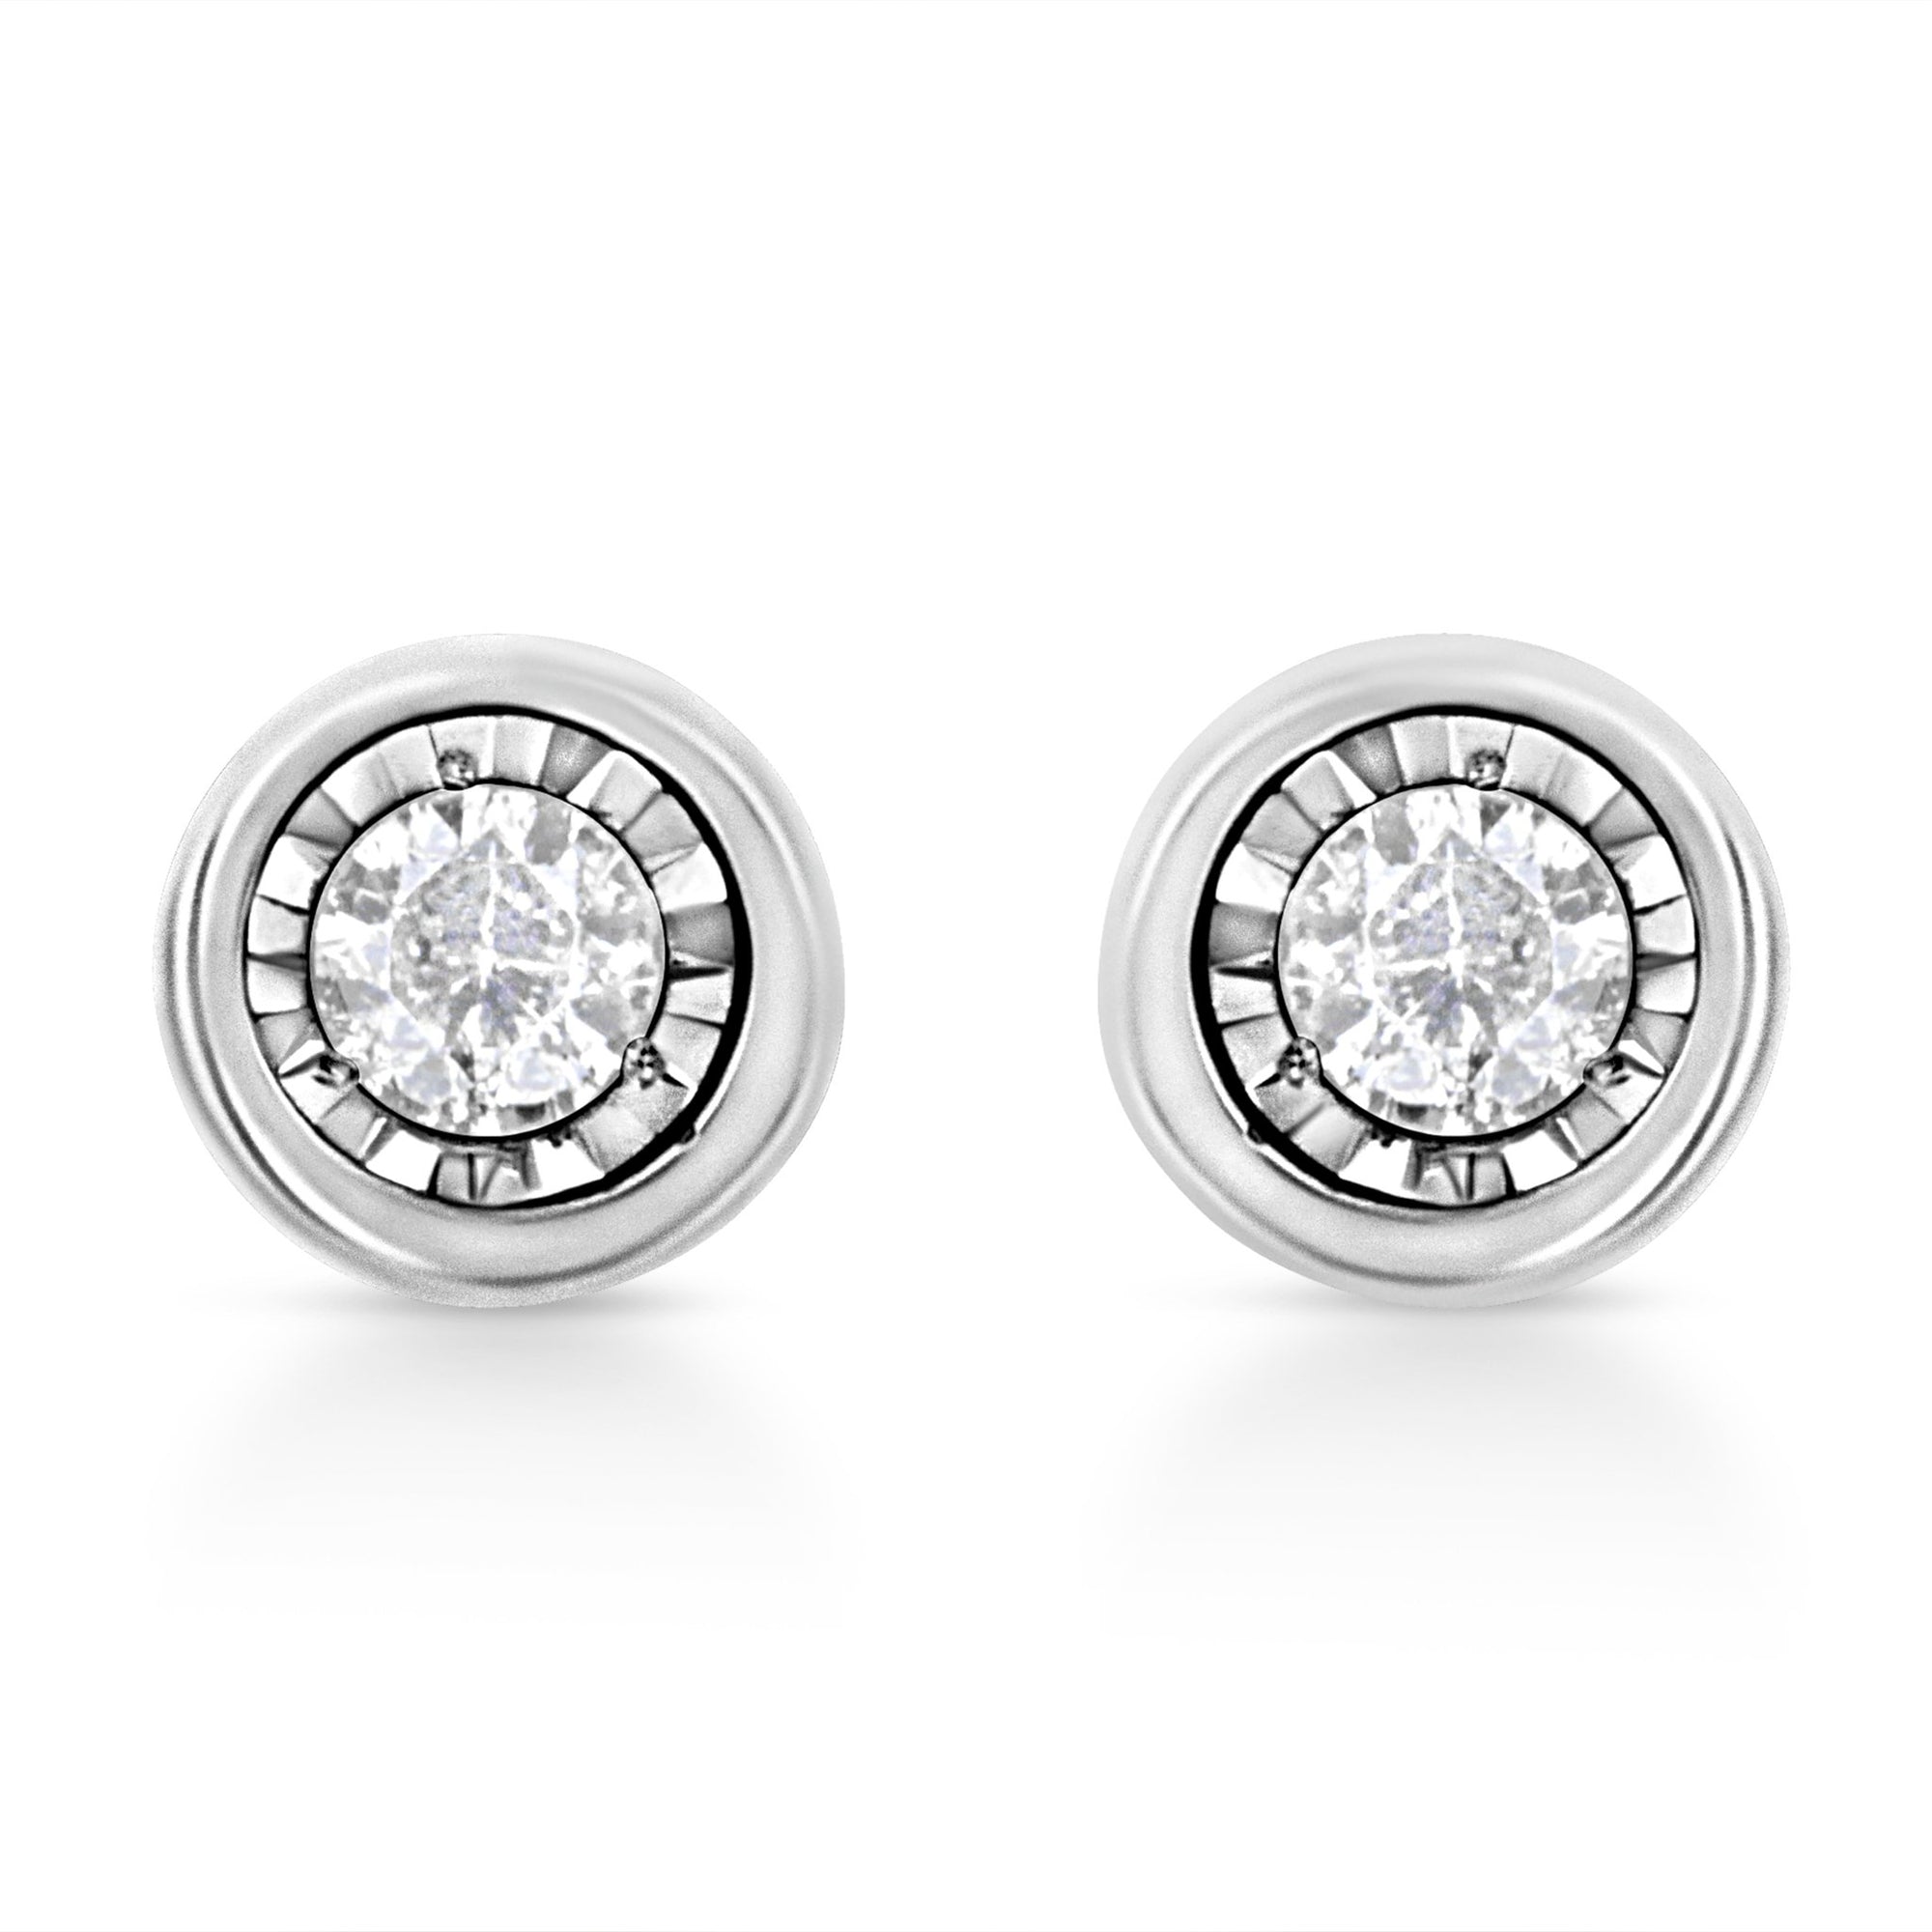 .925 Sterling Silver 1/10 Cttw Miracle-Set Diamond Circle Shape Stud Earrings (I-J Color, I2-I3 Clarity) - LinkagejewelrydesignLinkagejewelrydesign